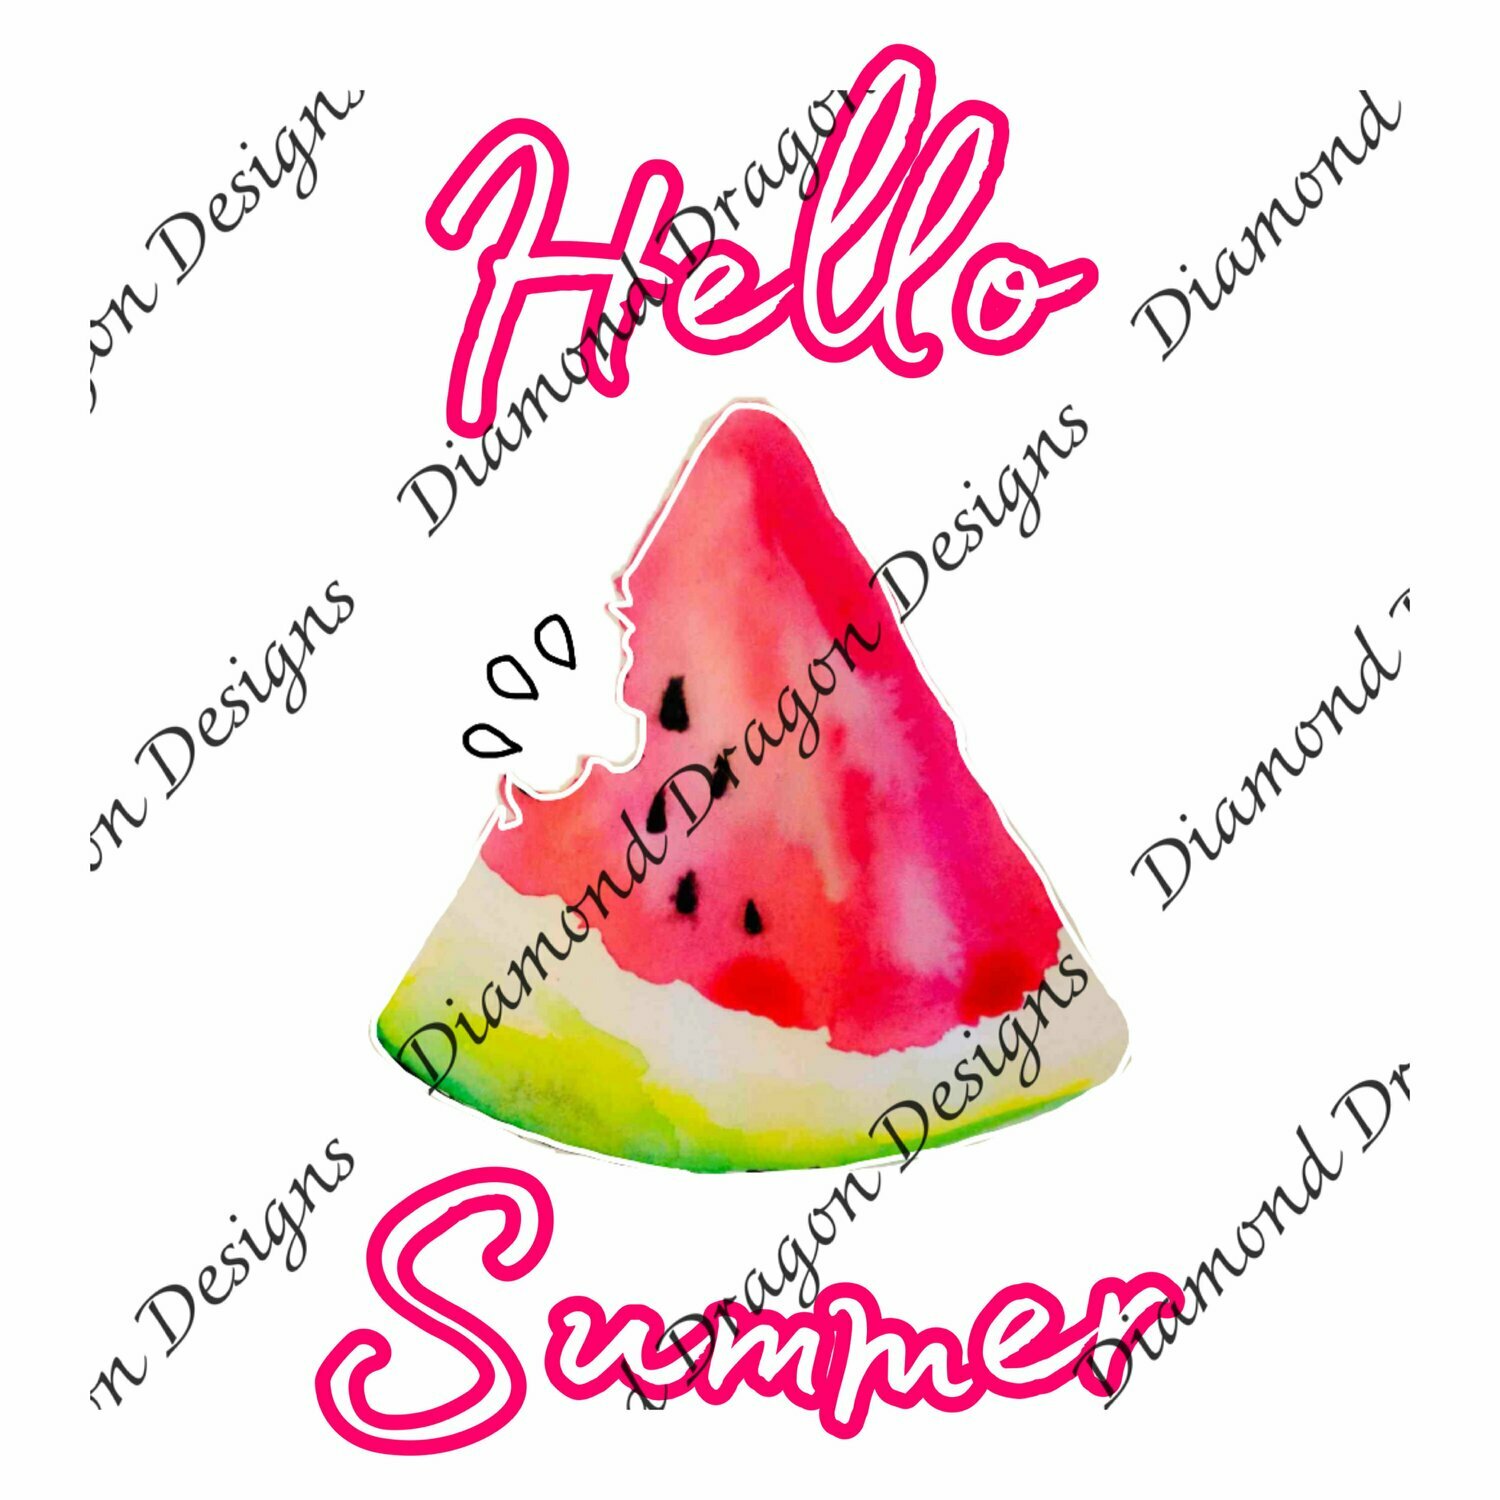 Watermelon - Summer, Summer Time, Hello Summer, Quote, Watermelon Watercolor, Waterslide